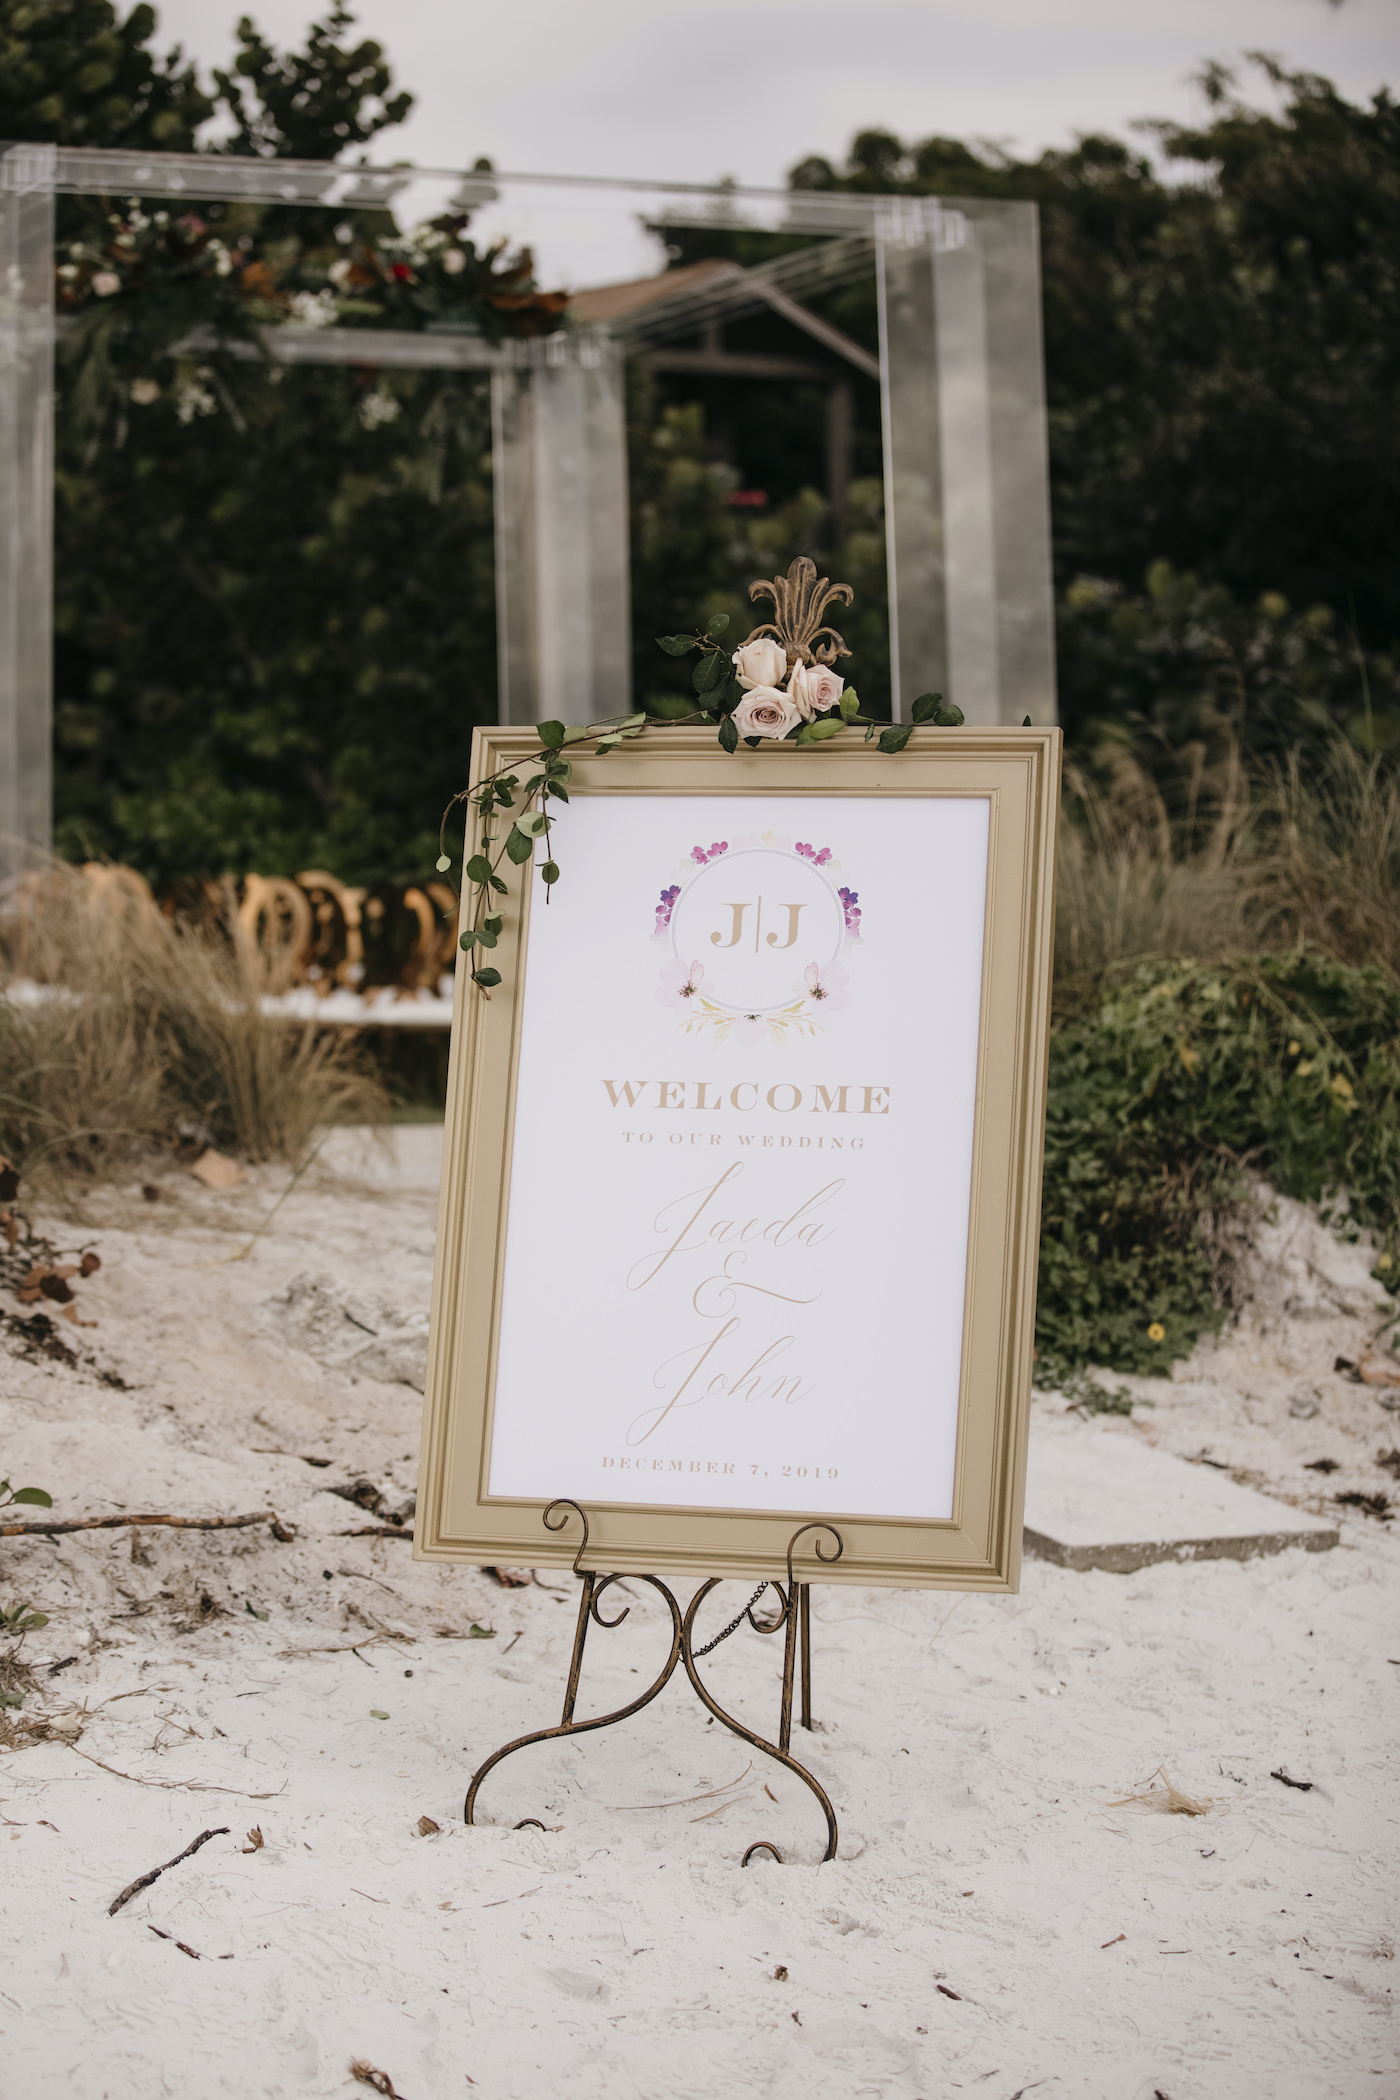 Sarasota Beach Wedding Welcome Sign in Gold Frame with Blush Pink and Gold Calligraphy